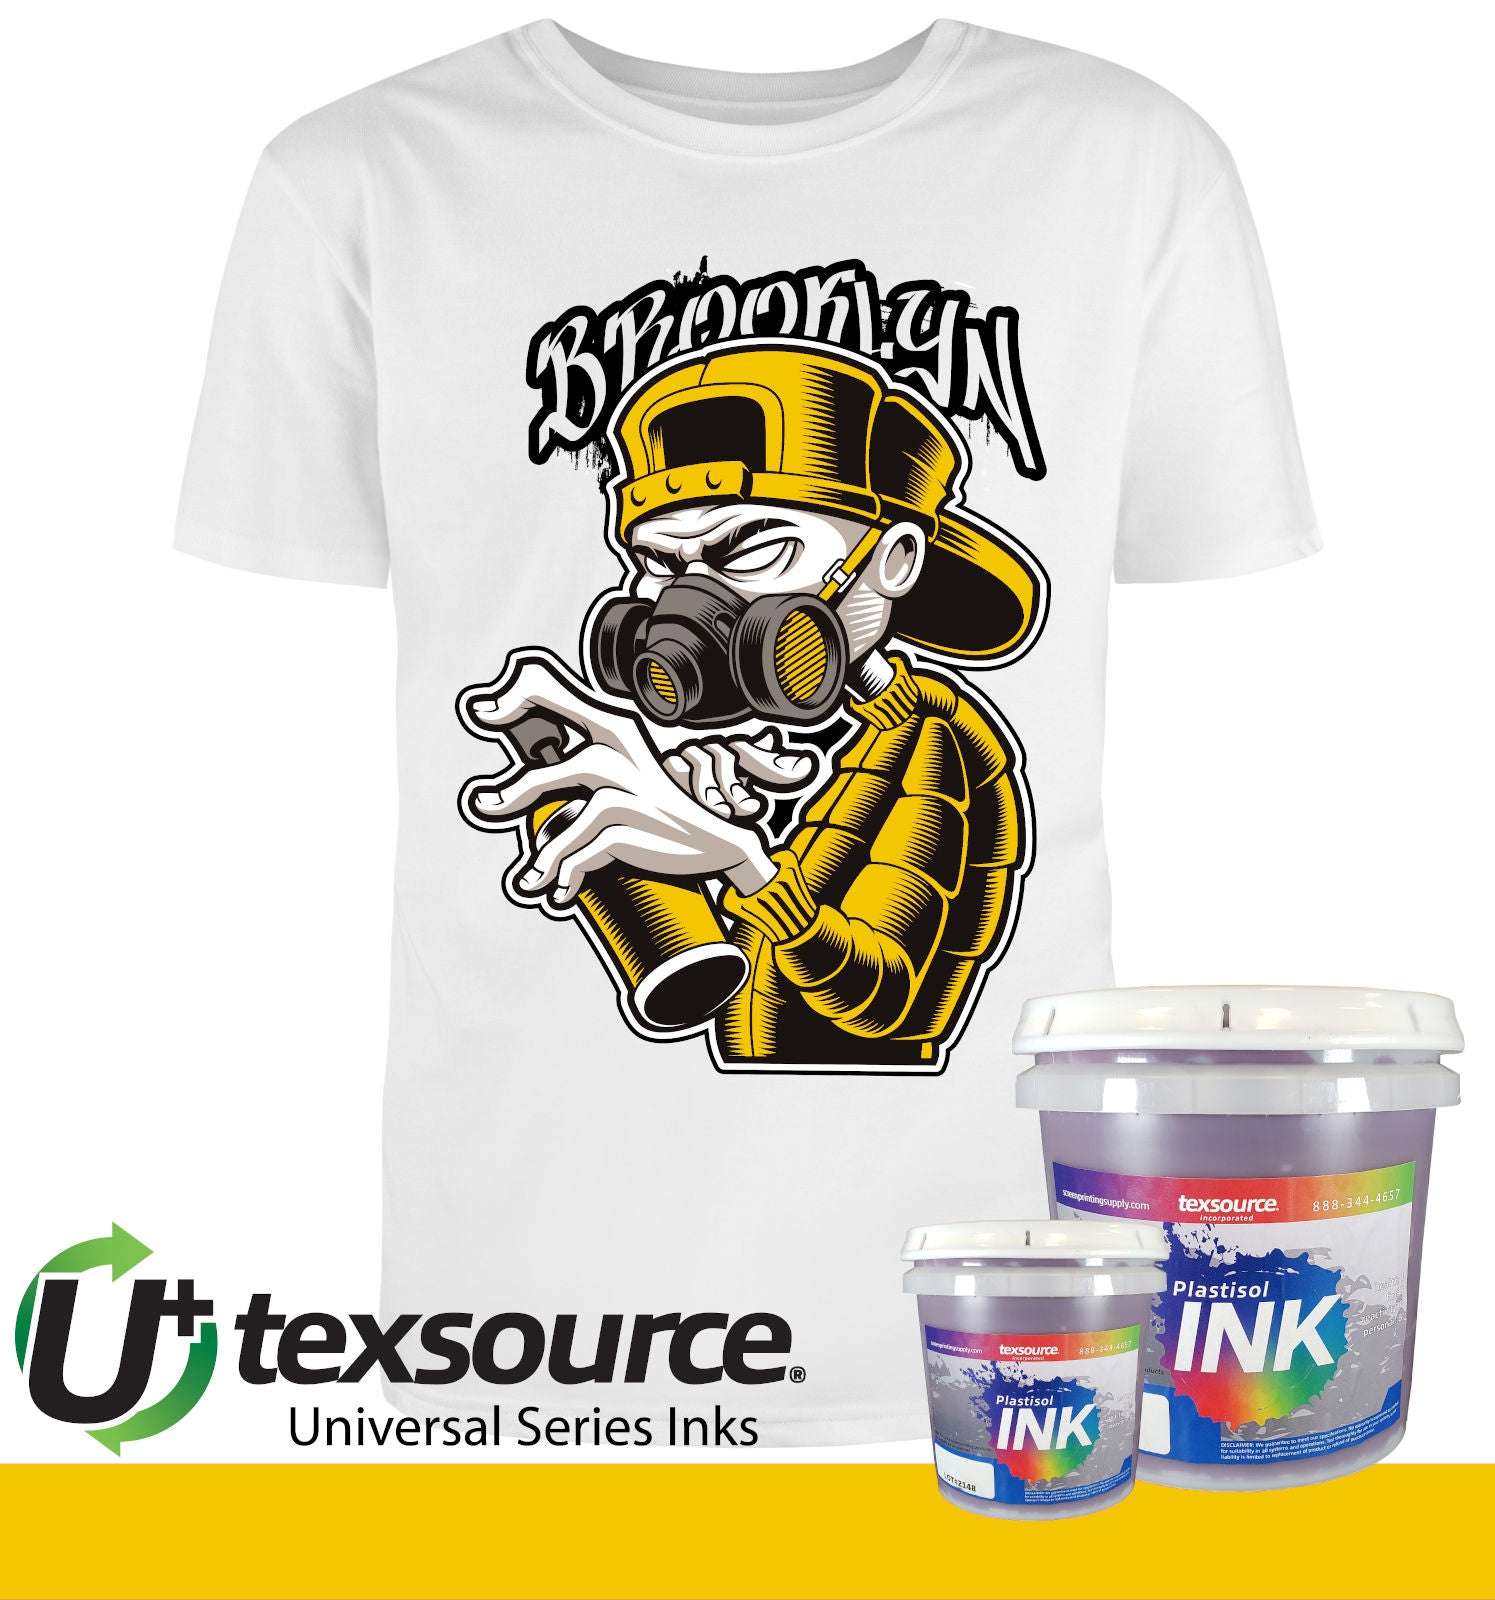 Texsource Specialty Ink - Super Gold Lustre